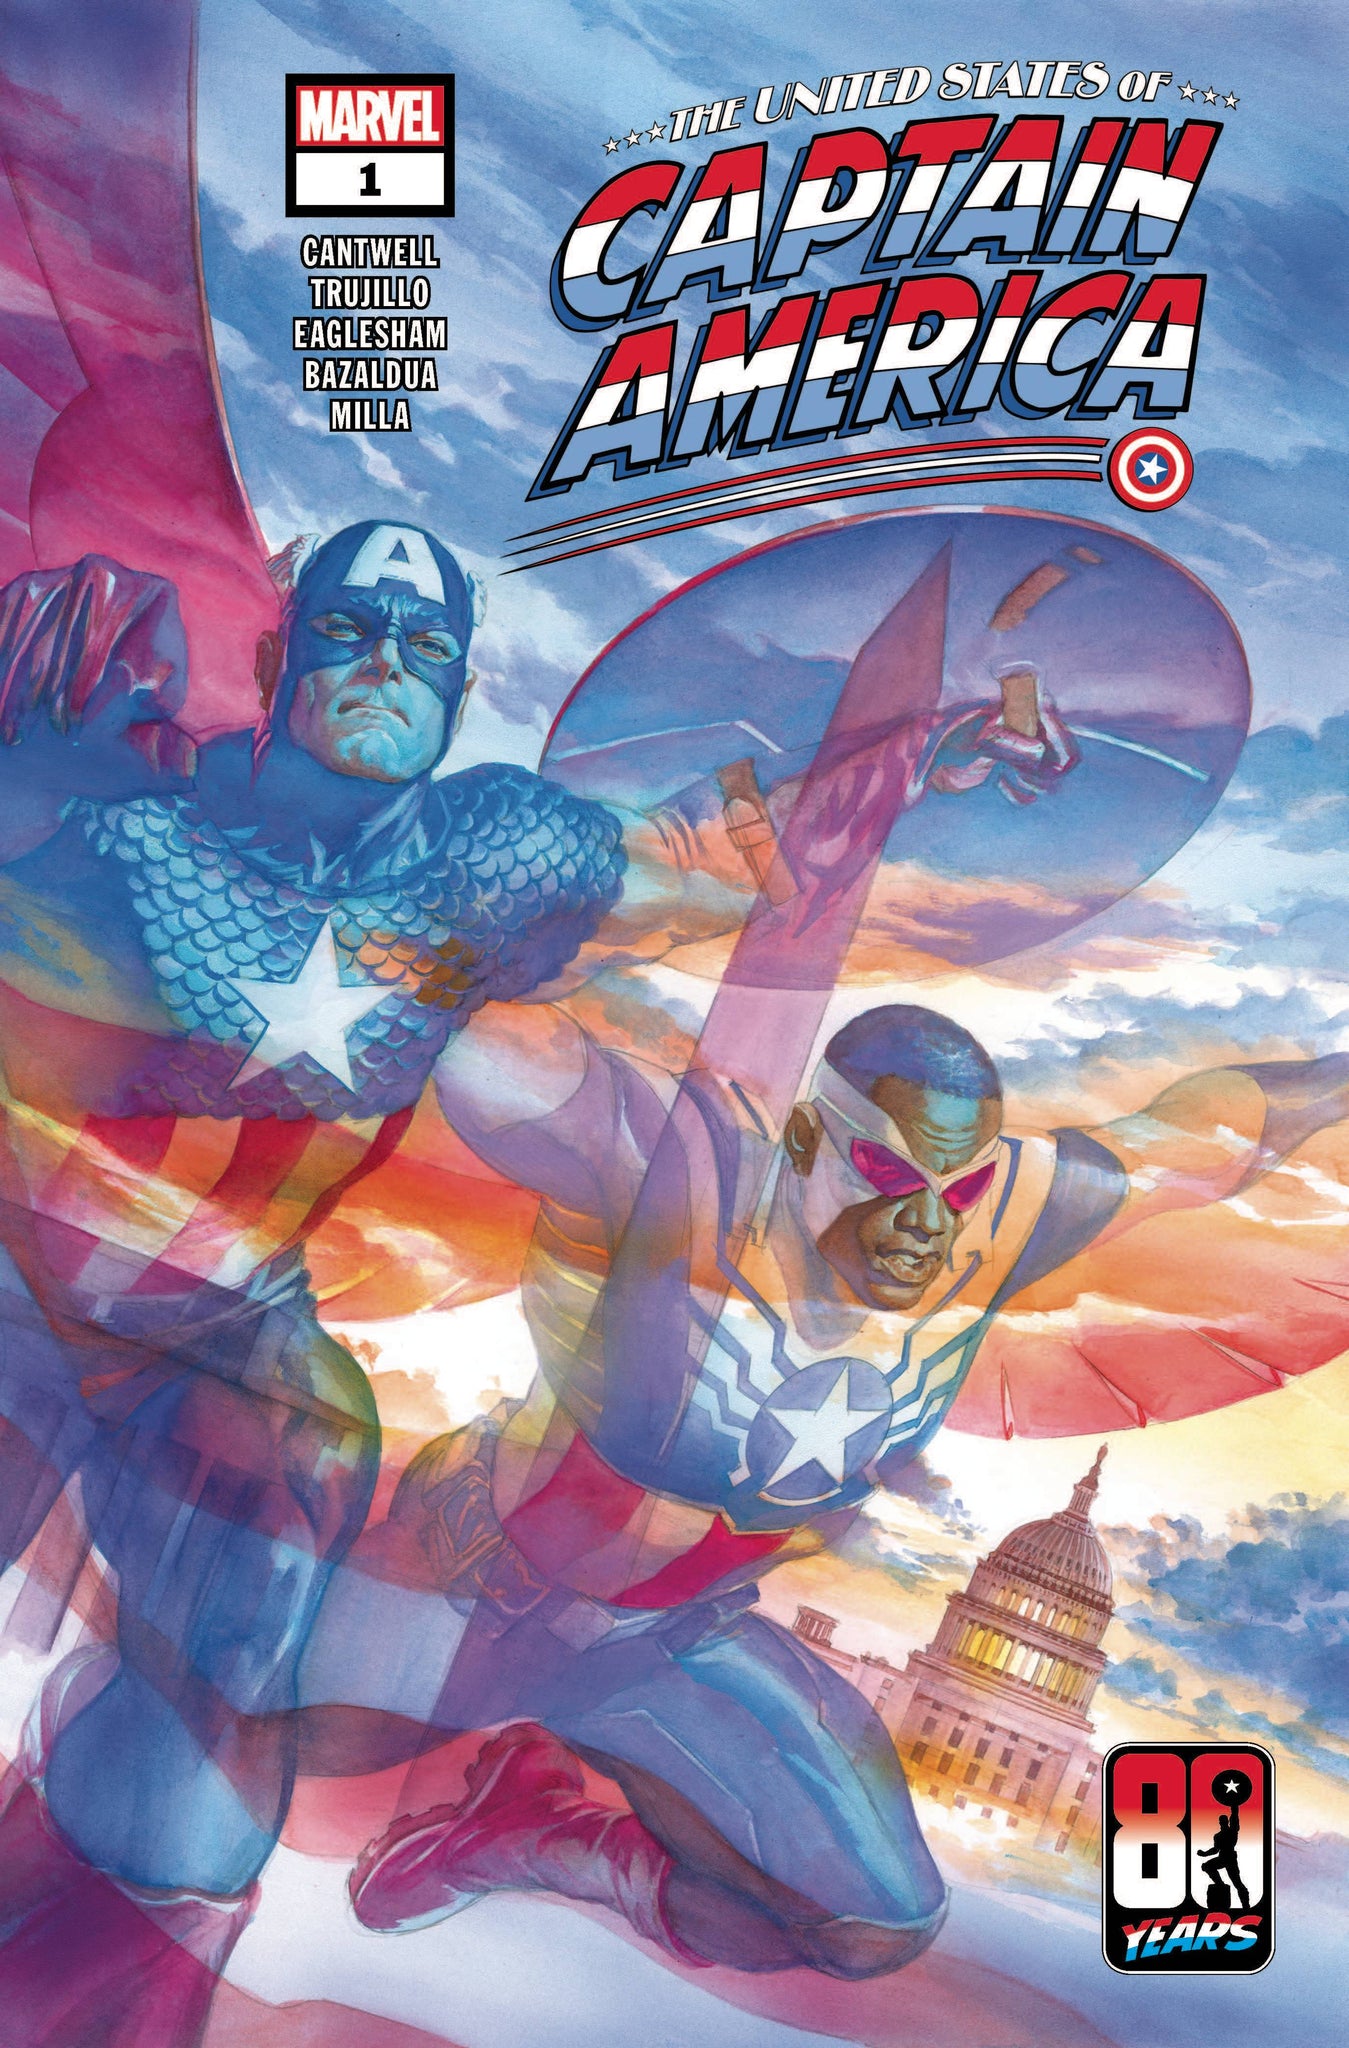 THE UNITED STATES OF CAPTAIN AMERICA 1 (OF 5)